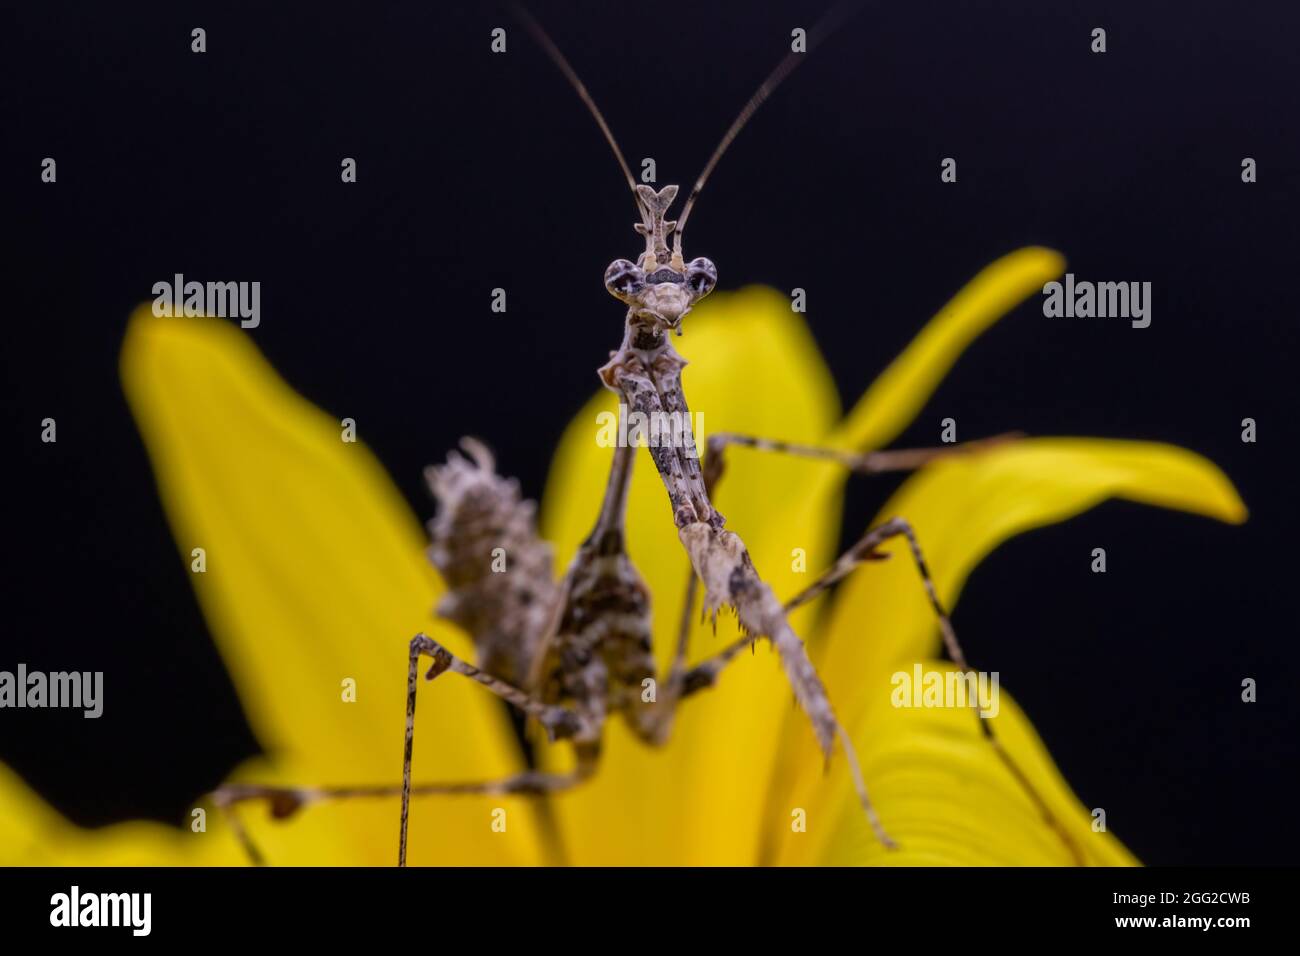 A close up macro photograph of a Cryptic Praying Mantis crawling across the petals of a yellow flower, with a black backdrop. Stock Photo